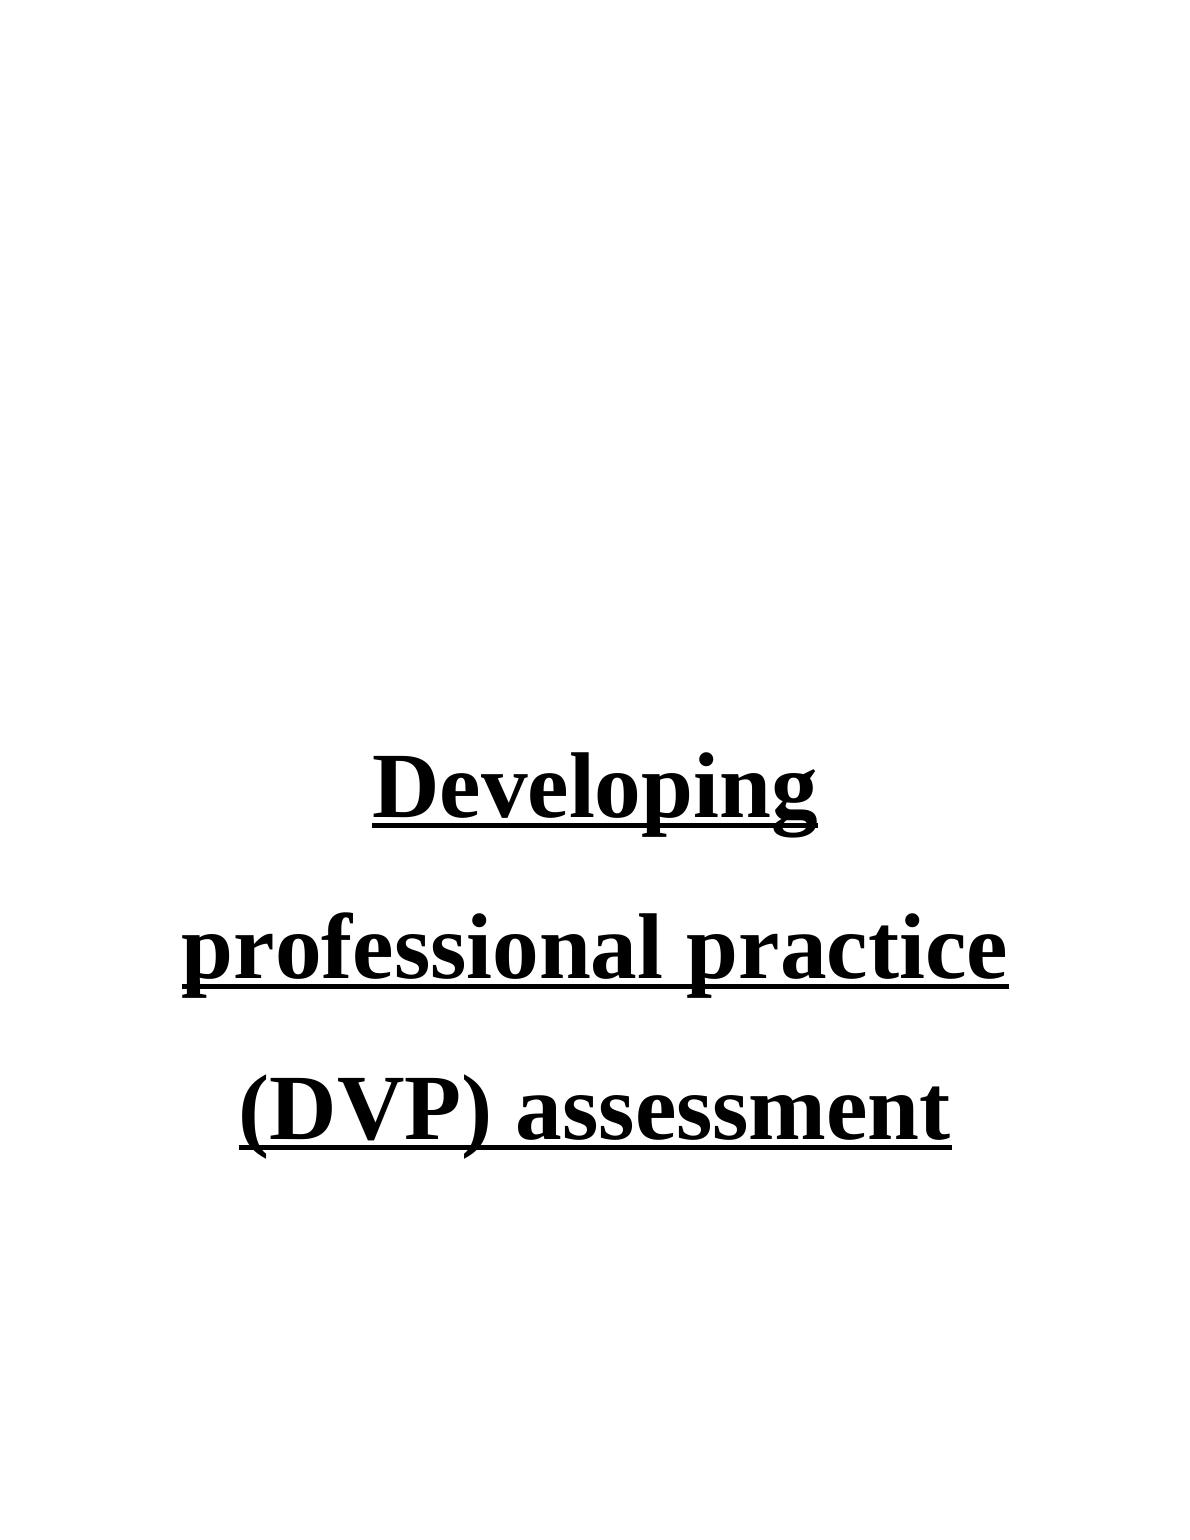 Developing professional practice (DVP) Assessment_1